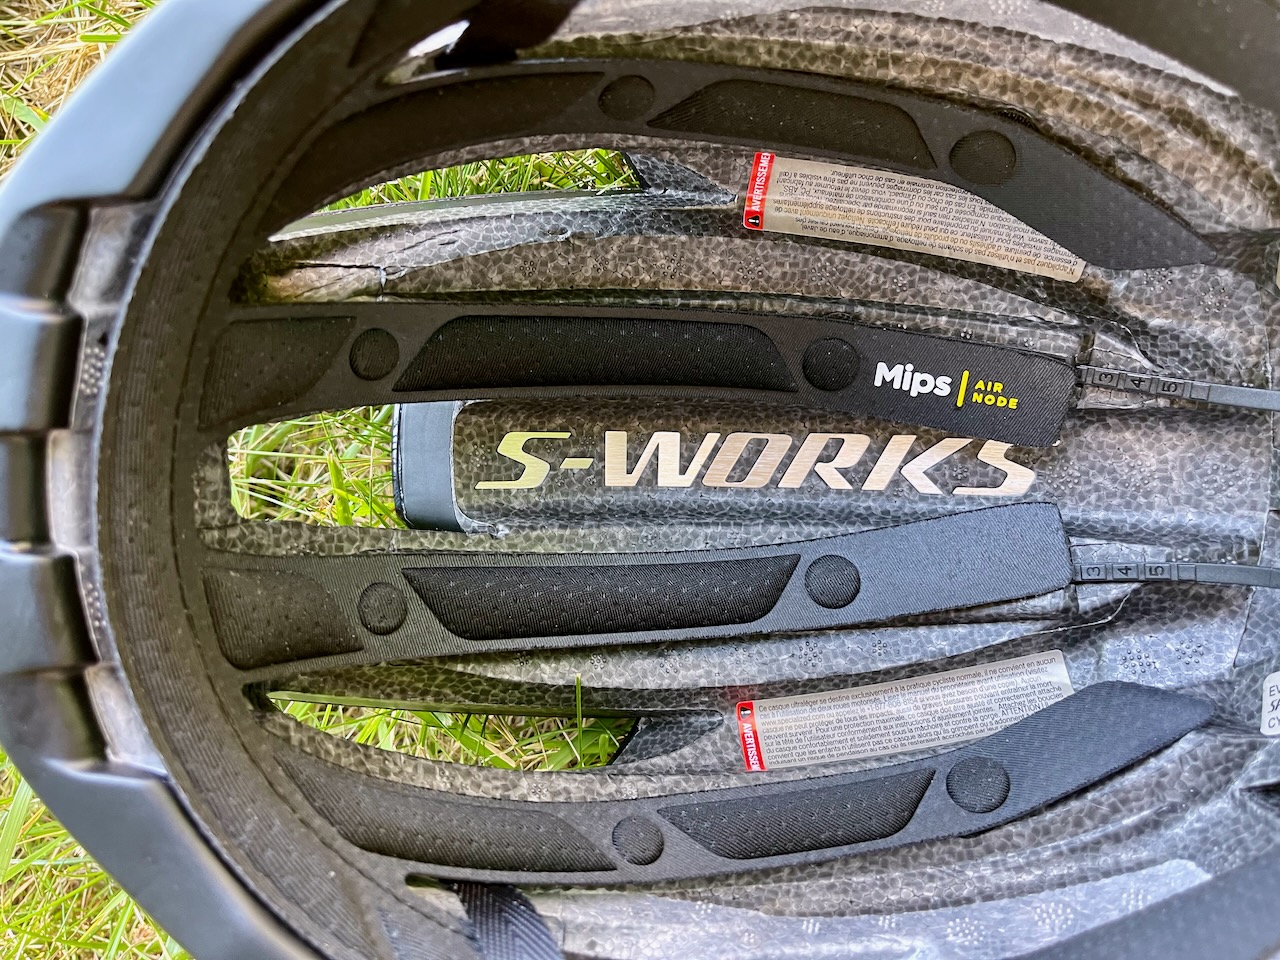 First impressions: Specialized S-Works Evade 3 and S-Works Prevail 3 road  cycling helmets - Bikerumor